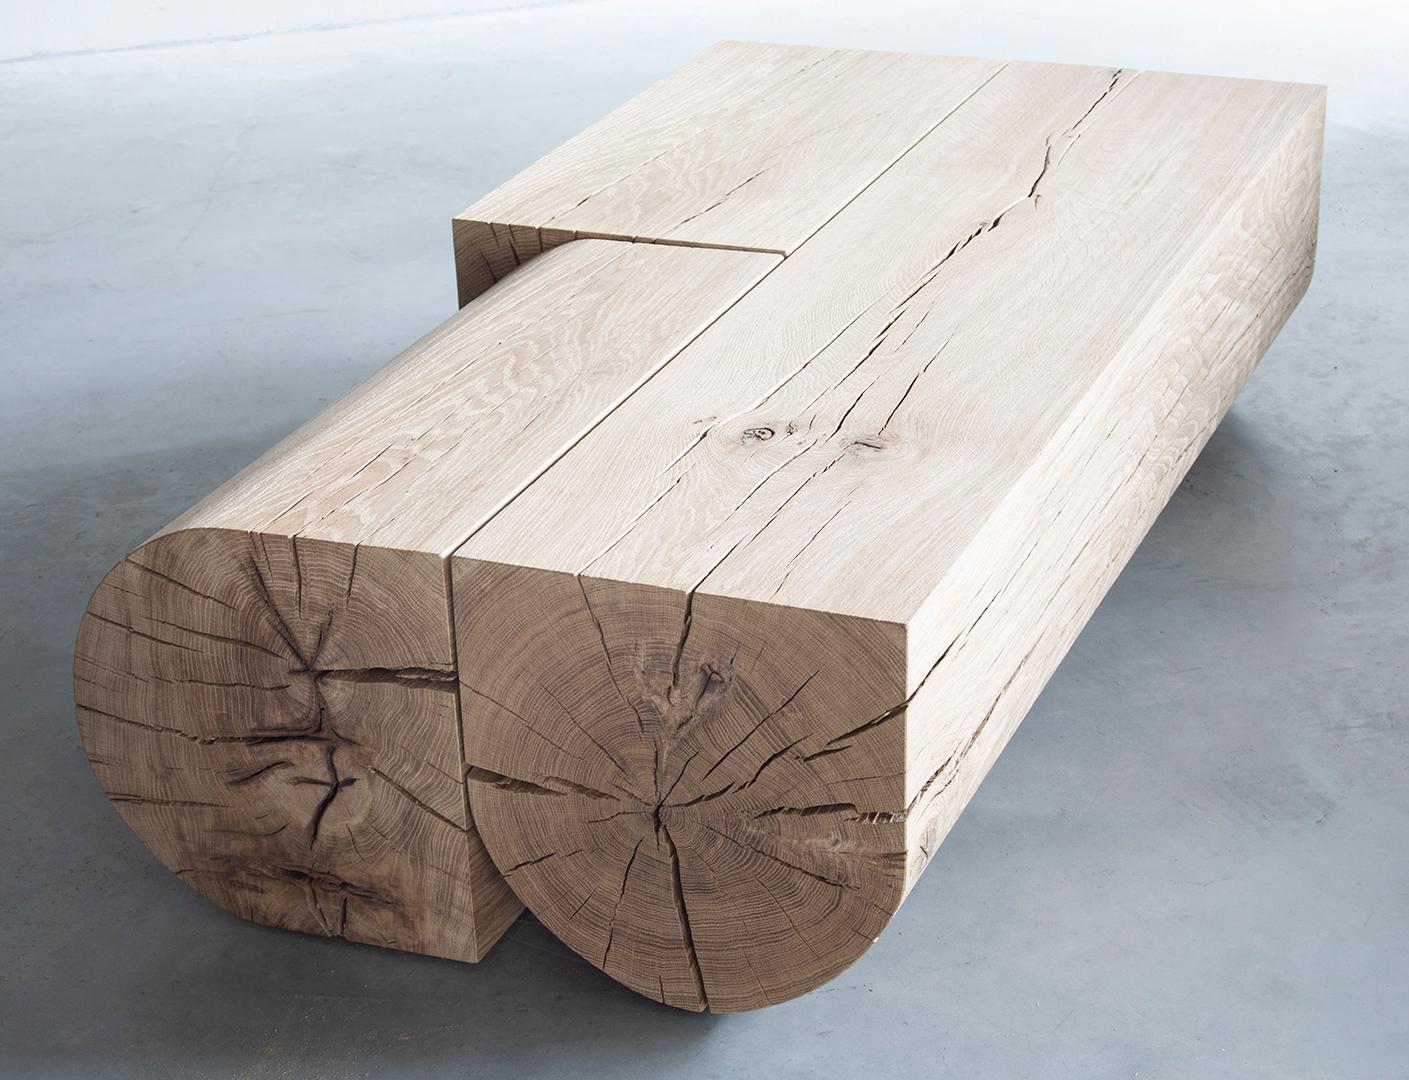 Adjacencies Coffee Table by Van Rossum
Dimensions: D 144 x W 72 x H 37 cm
Materials: Solid French Oak, Steel


For over 40 years, Van Rossum has designed and handmade solid and sustainable furniture from the workshop in Bergharen, the Netherlands.